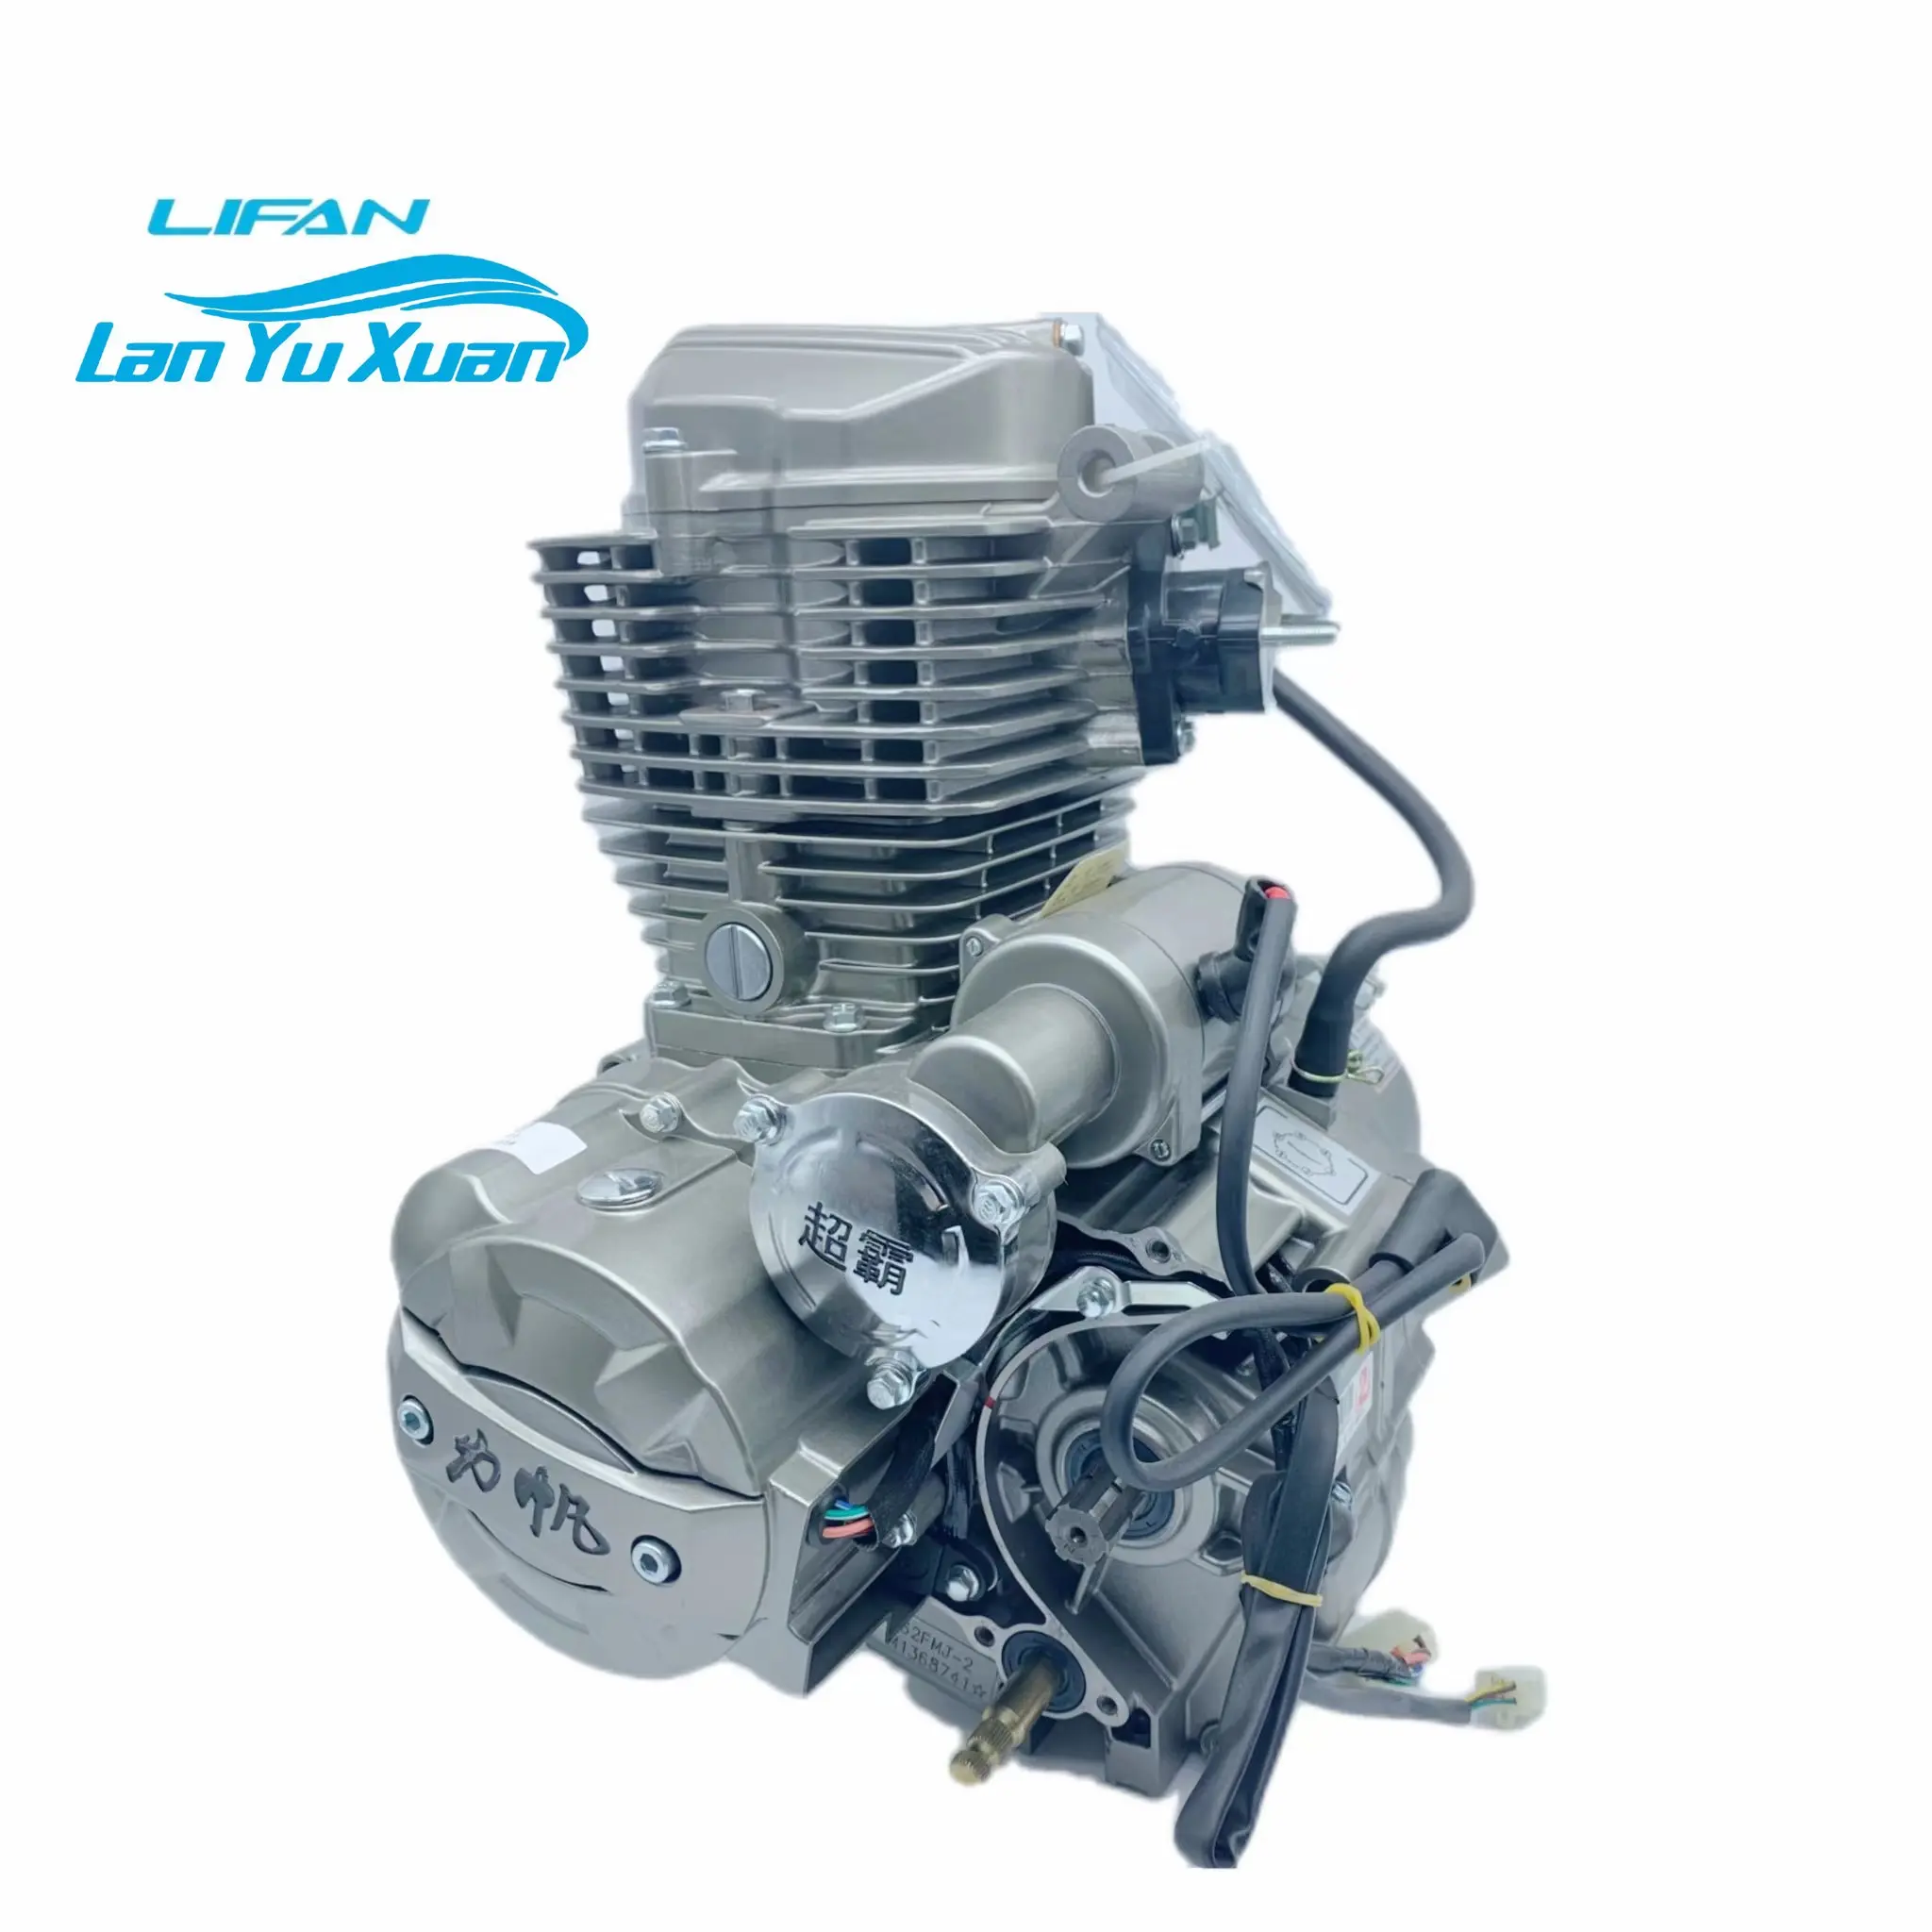 Hot selling Lifan motorcycle 250cc engine Engine motorcycle 250cc, China motorcycle Lifan engine tricycle suitable for freight motorcycle engine 250cc water cooled tricycle engine